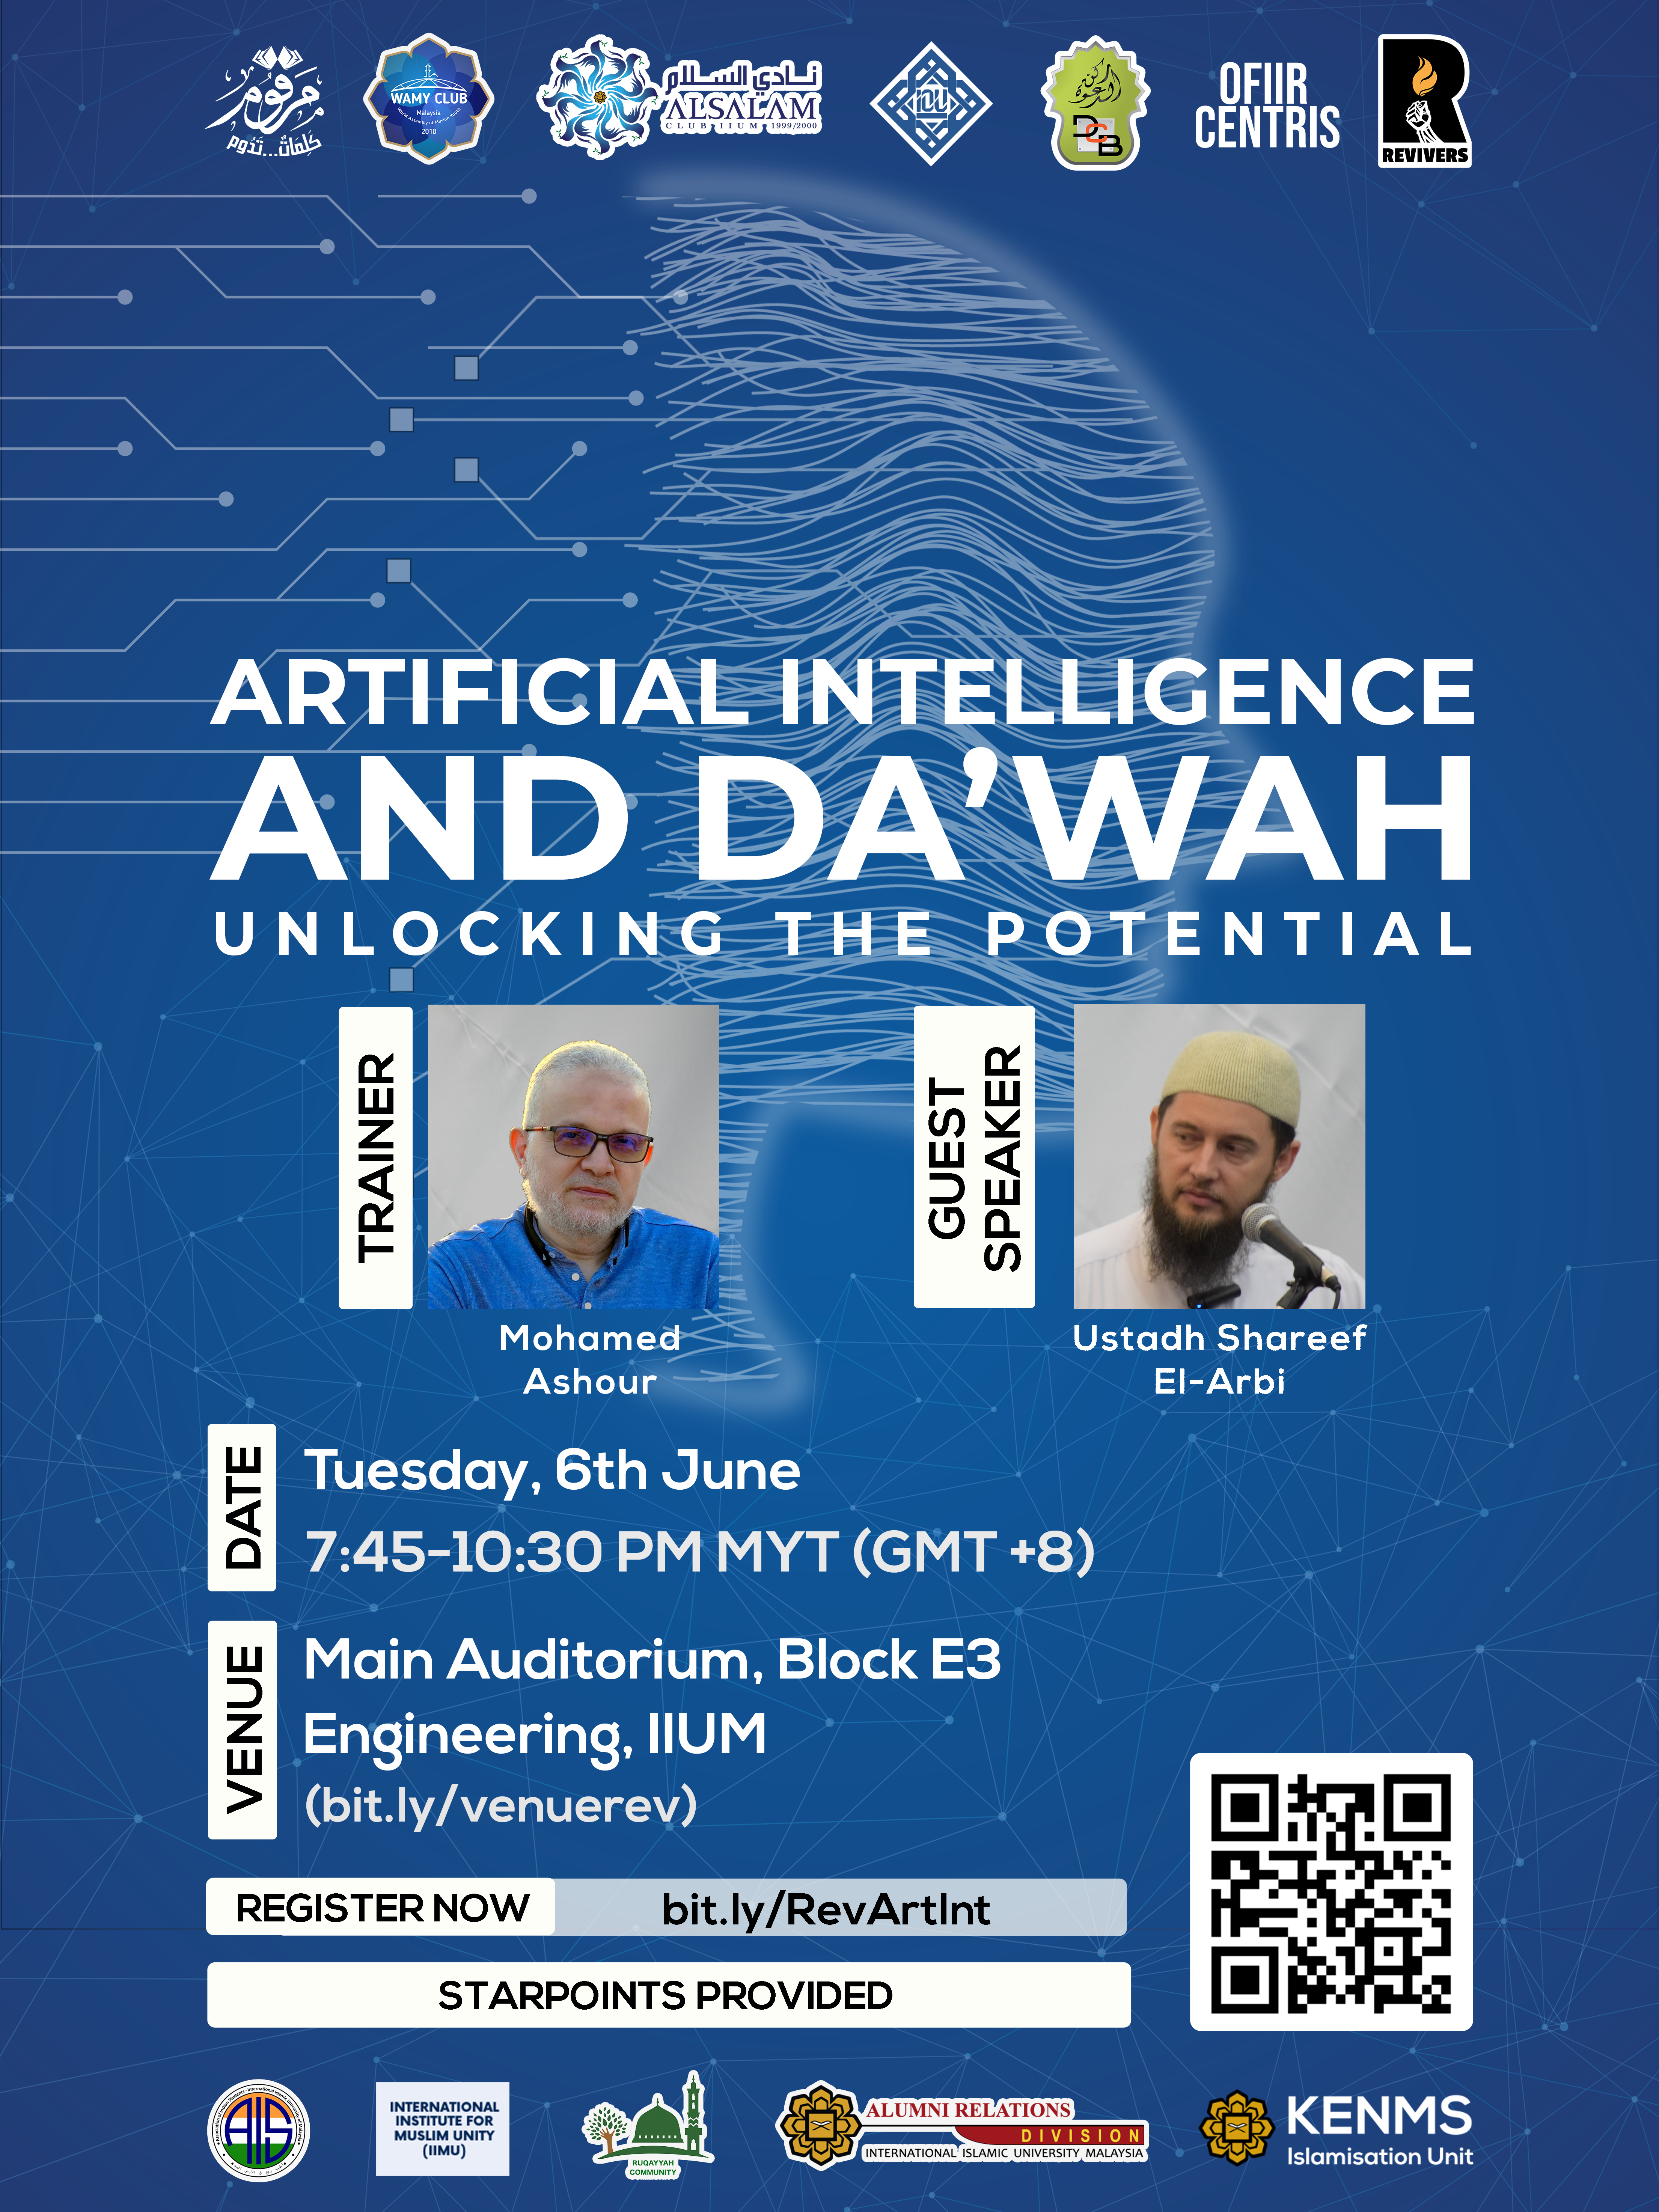 Artificial Intelligence and Da'wah unlockiing the potential